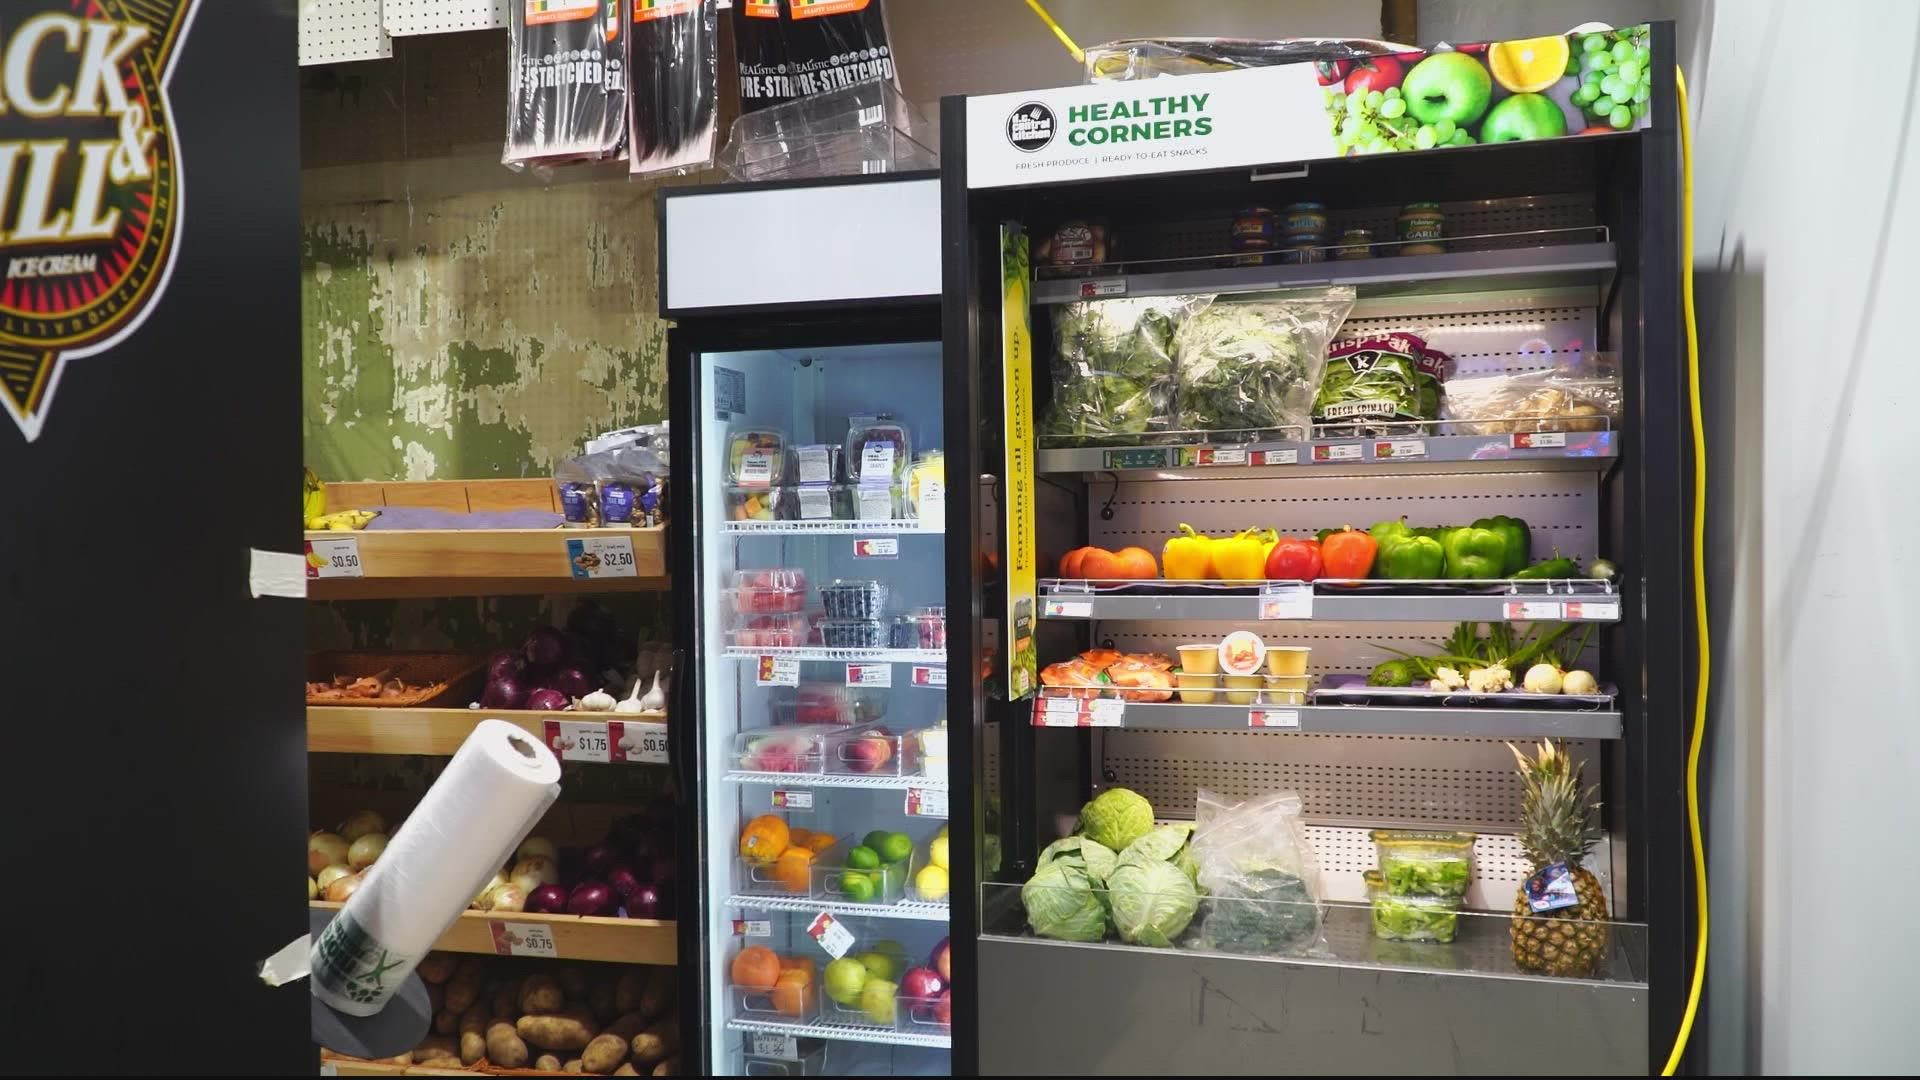 The project provides DC's corner stores with fresh fruits and vegetables.